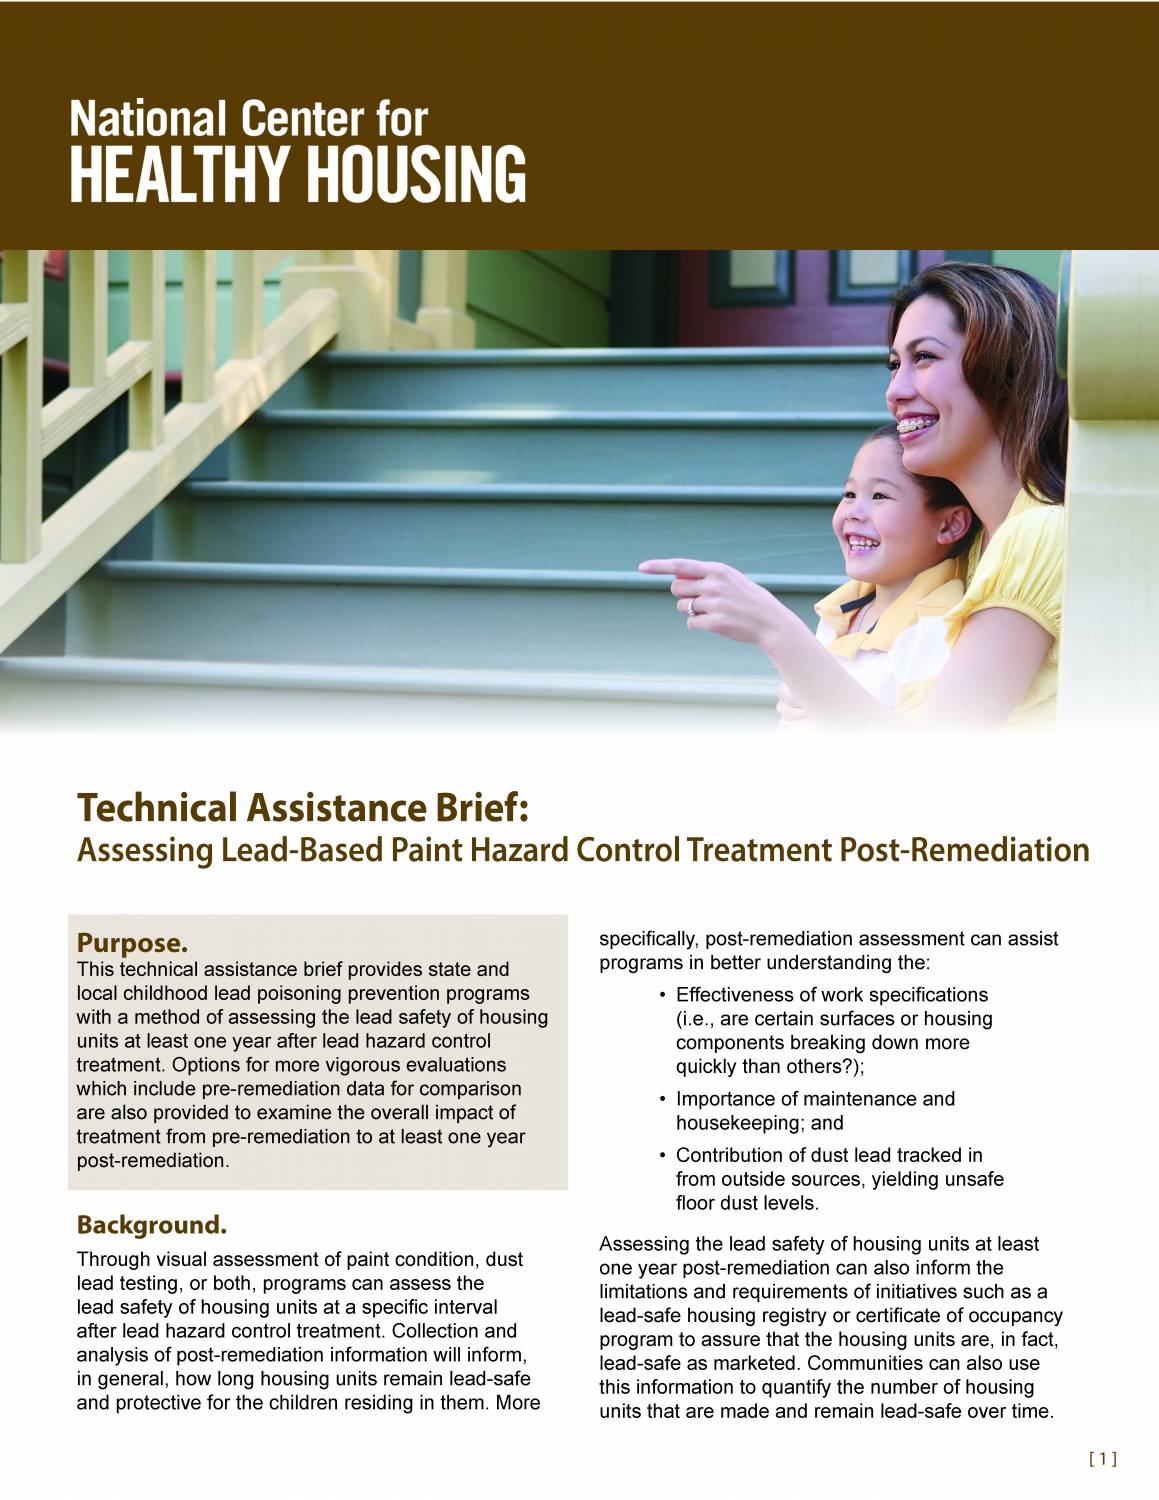 Assessing Lead-Based Paint Hazard Control Treatment Post-Remediation